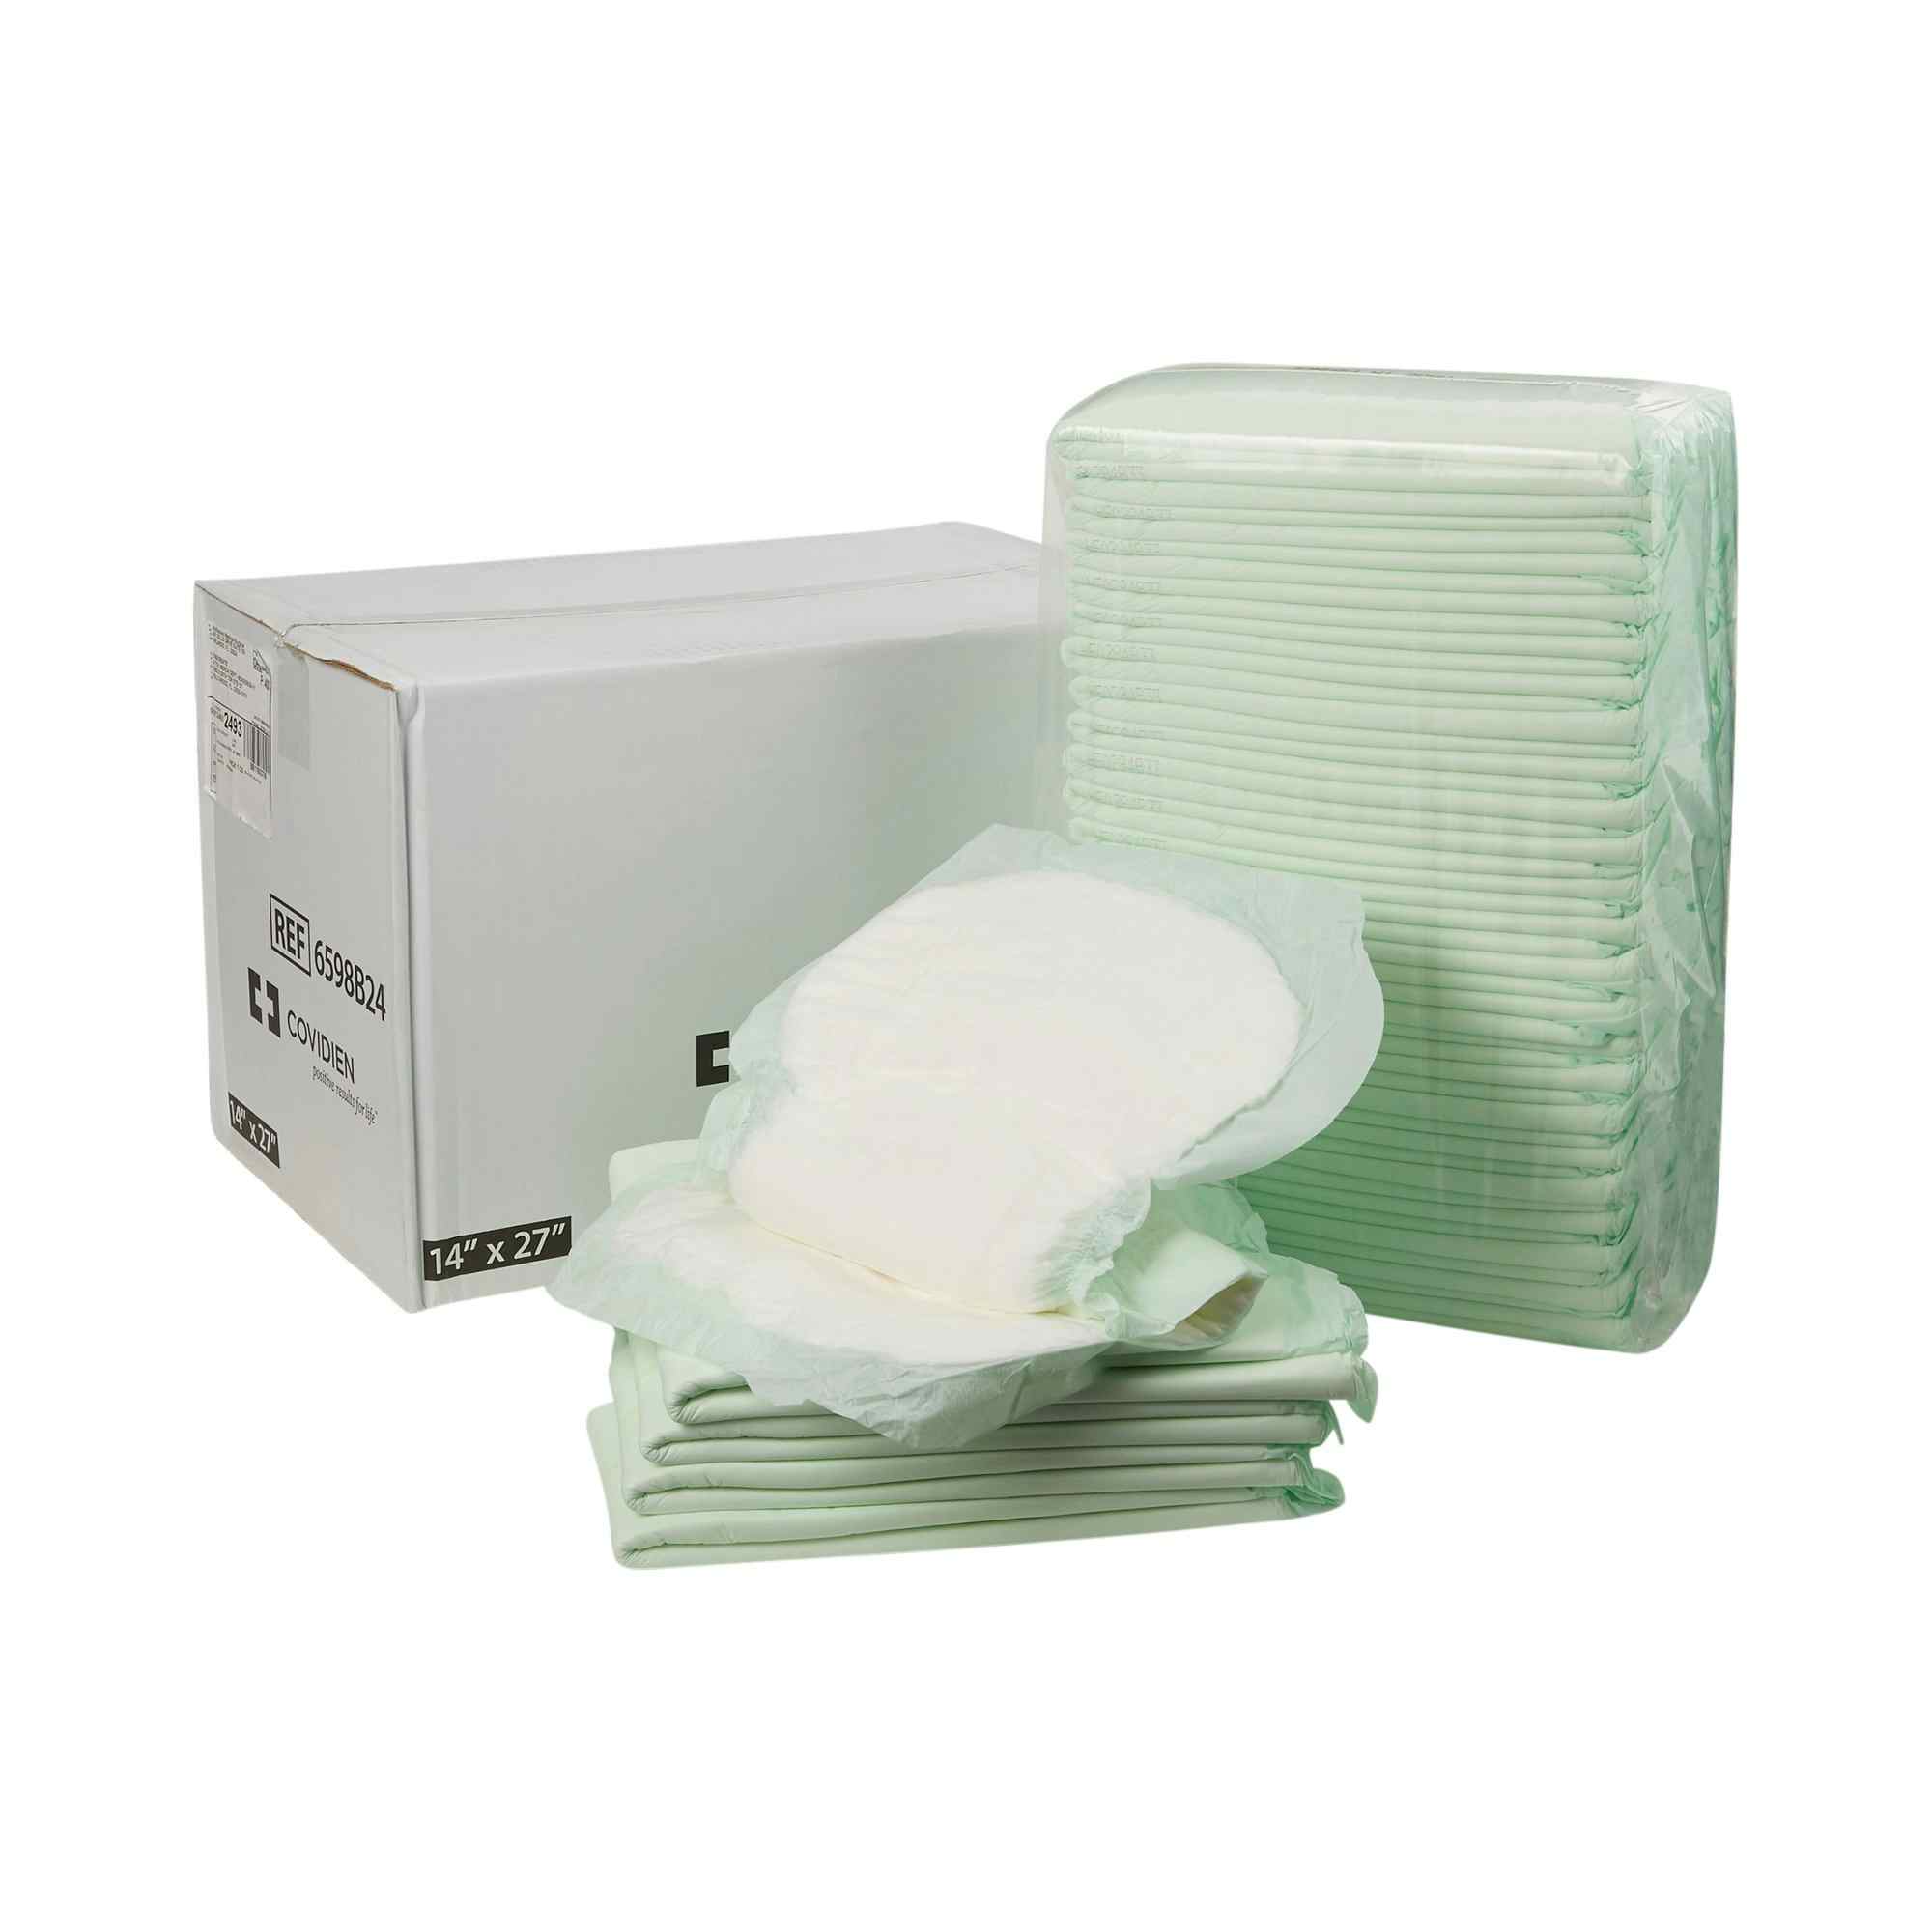 Wings Adult Unisex Disposable Incontinence Liner, Moderate Absorbency , 6598B24-, White - 14 X 27" - Case of 48 Liners (2 Packs)